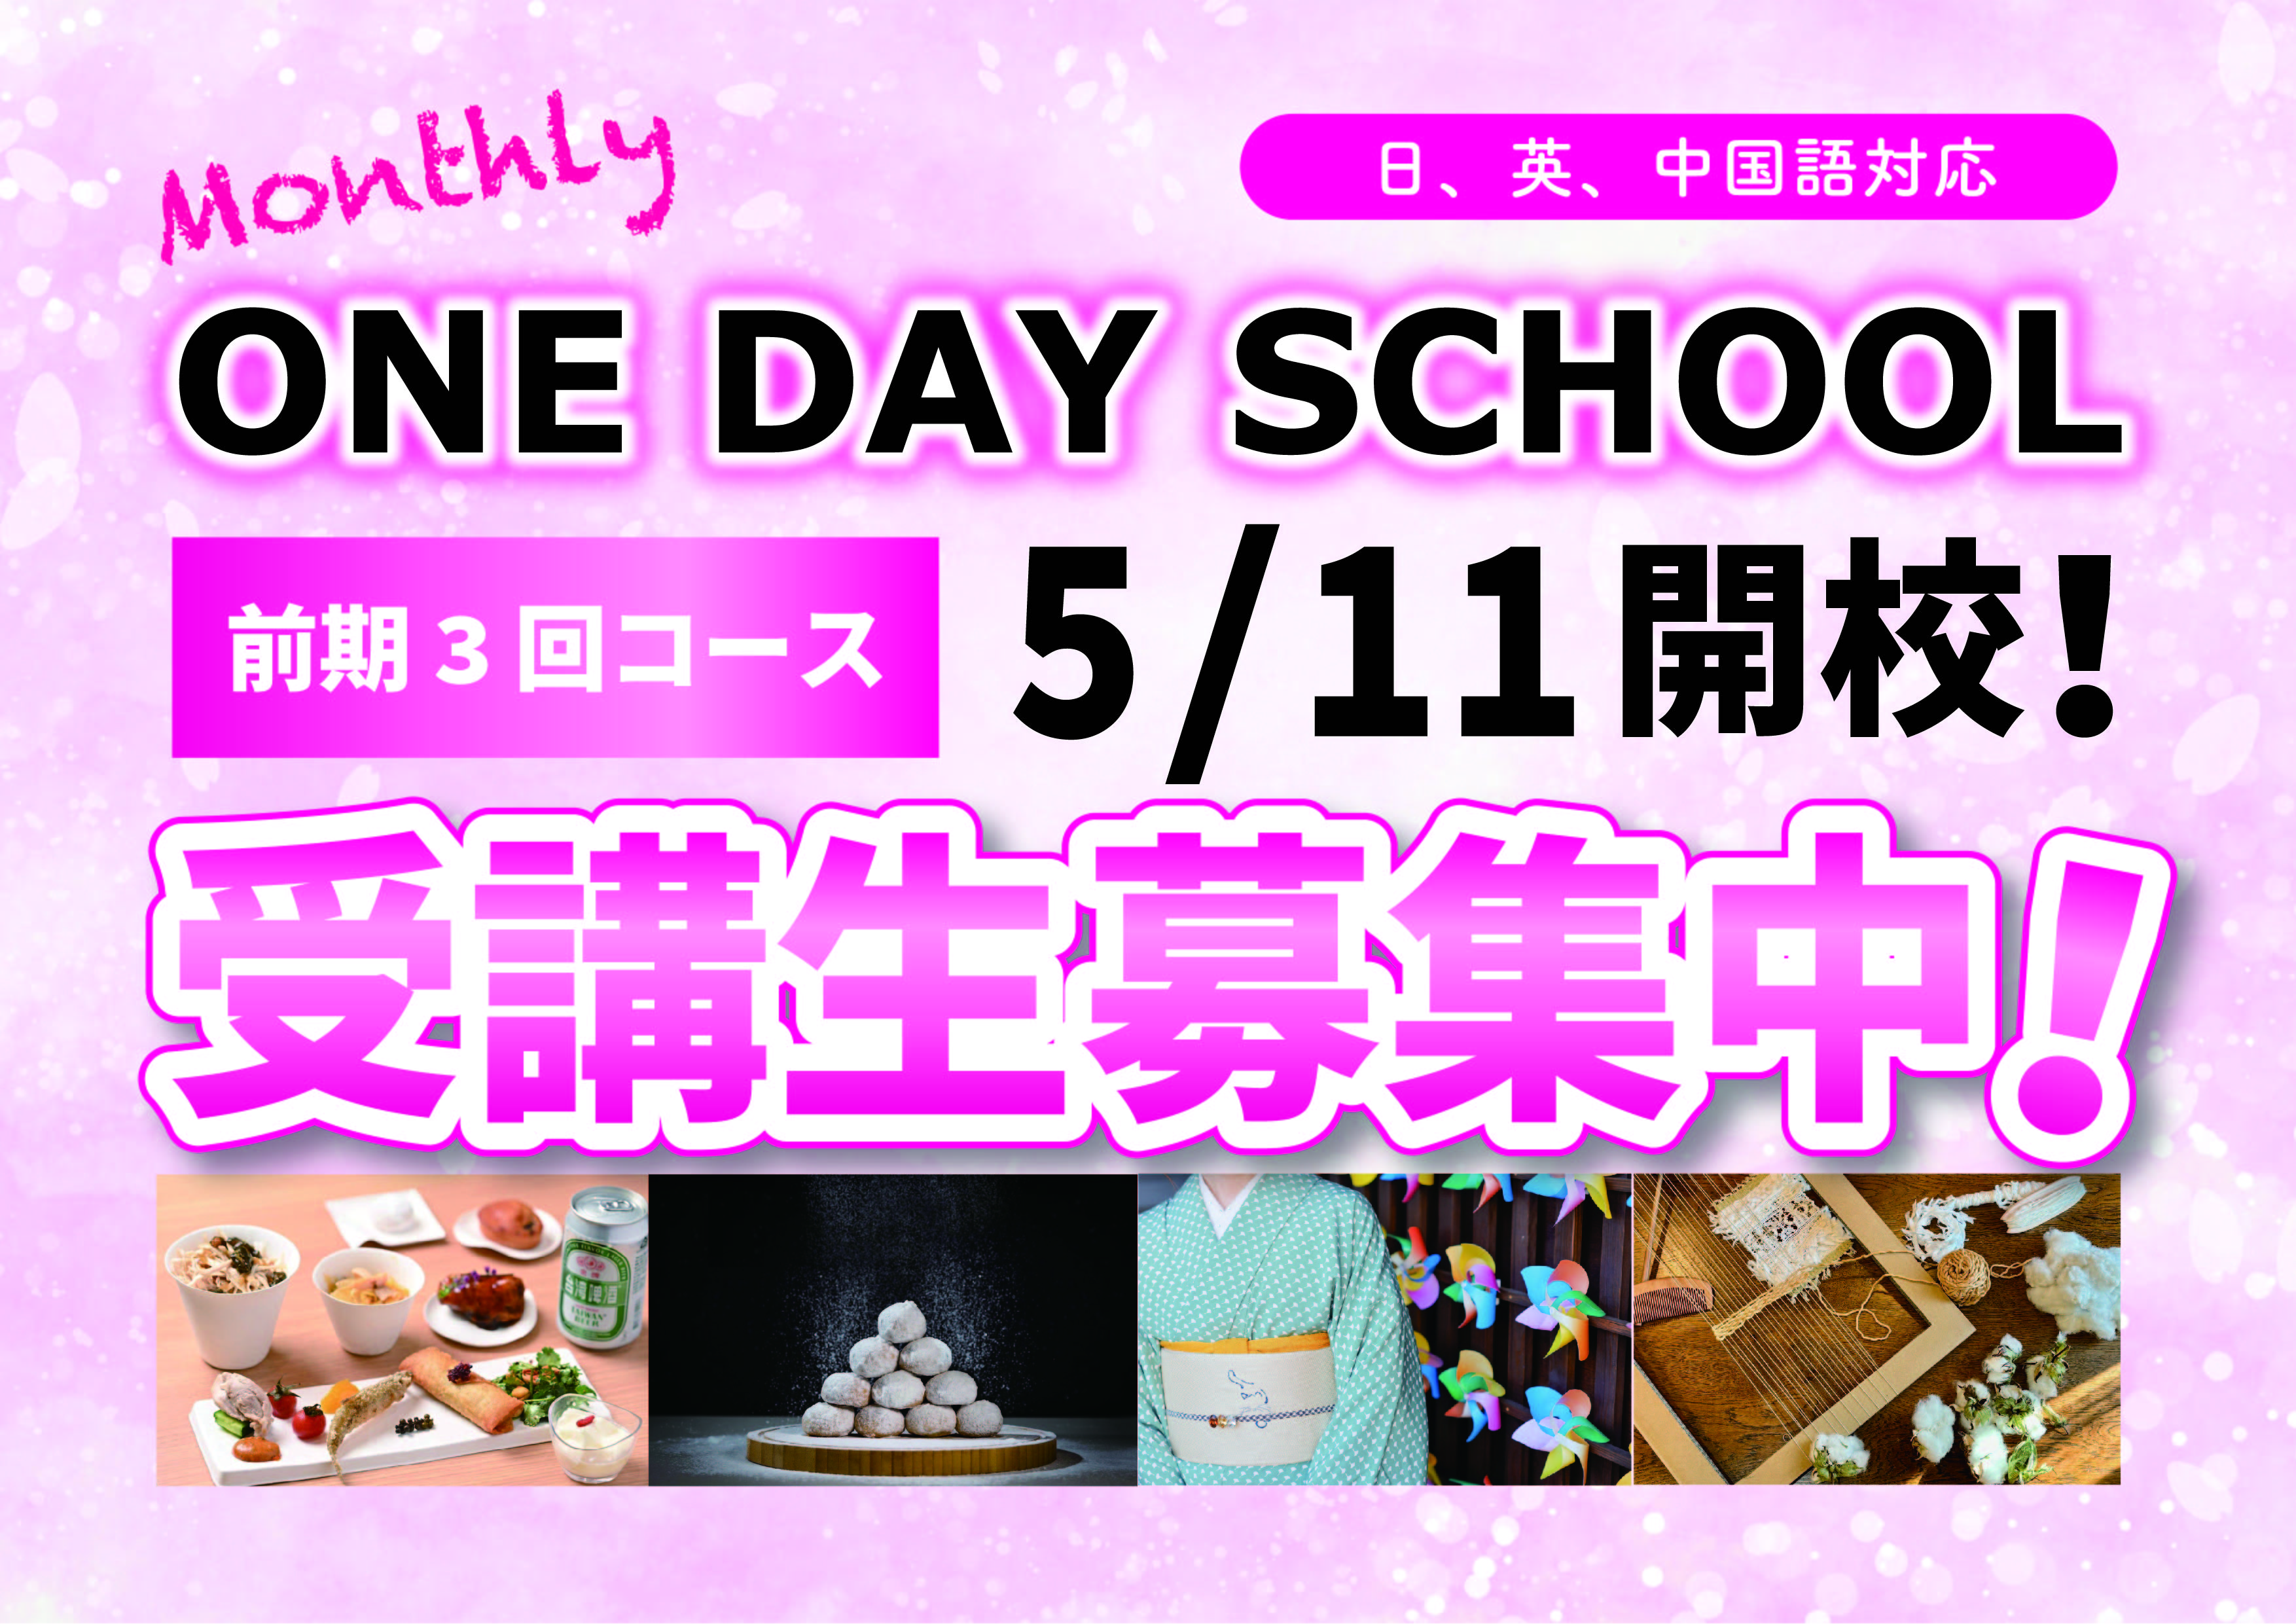 Monthly One Day School　＼５月から前期プログラムスタート！／